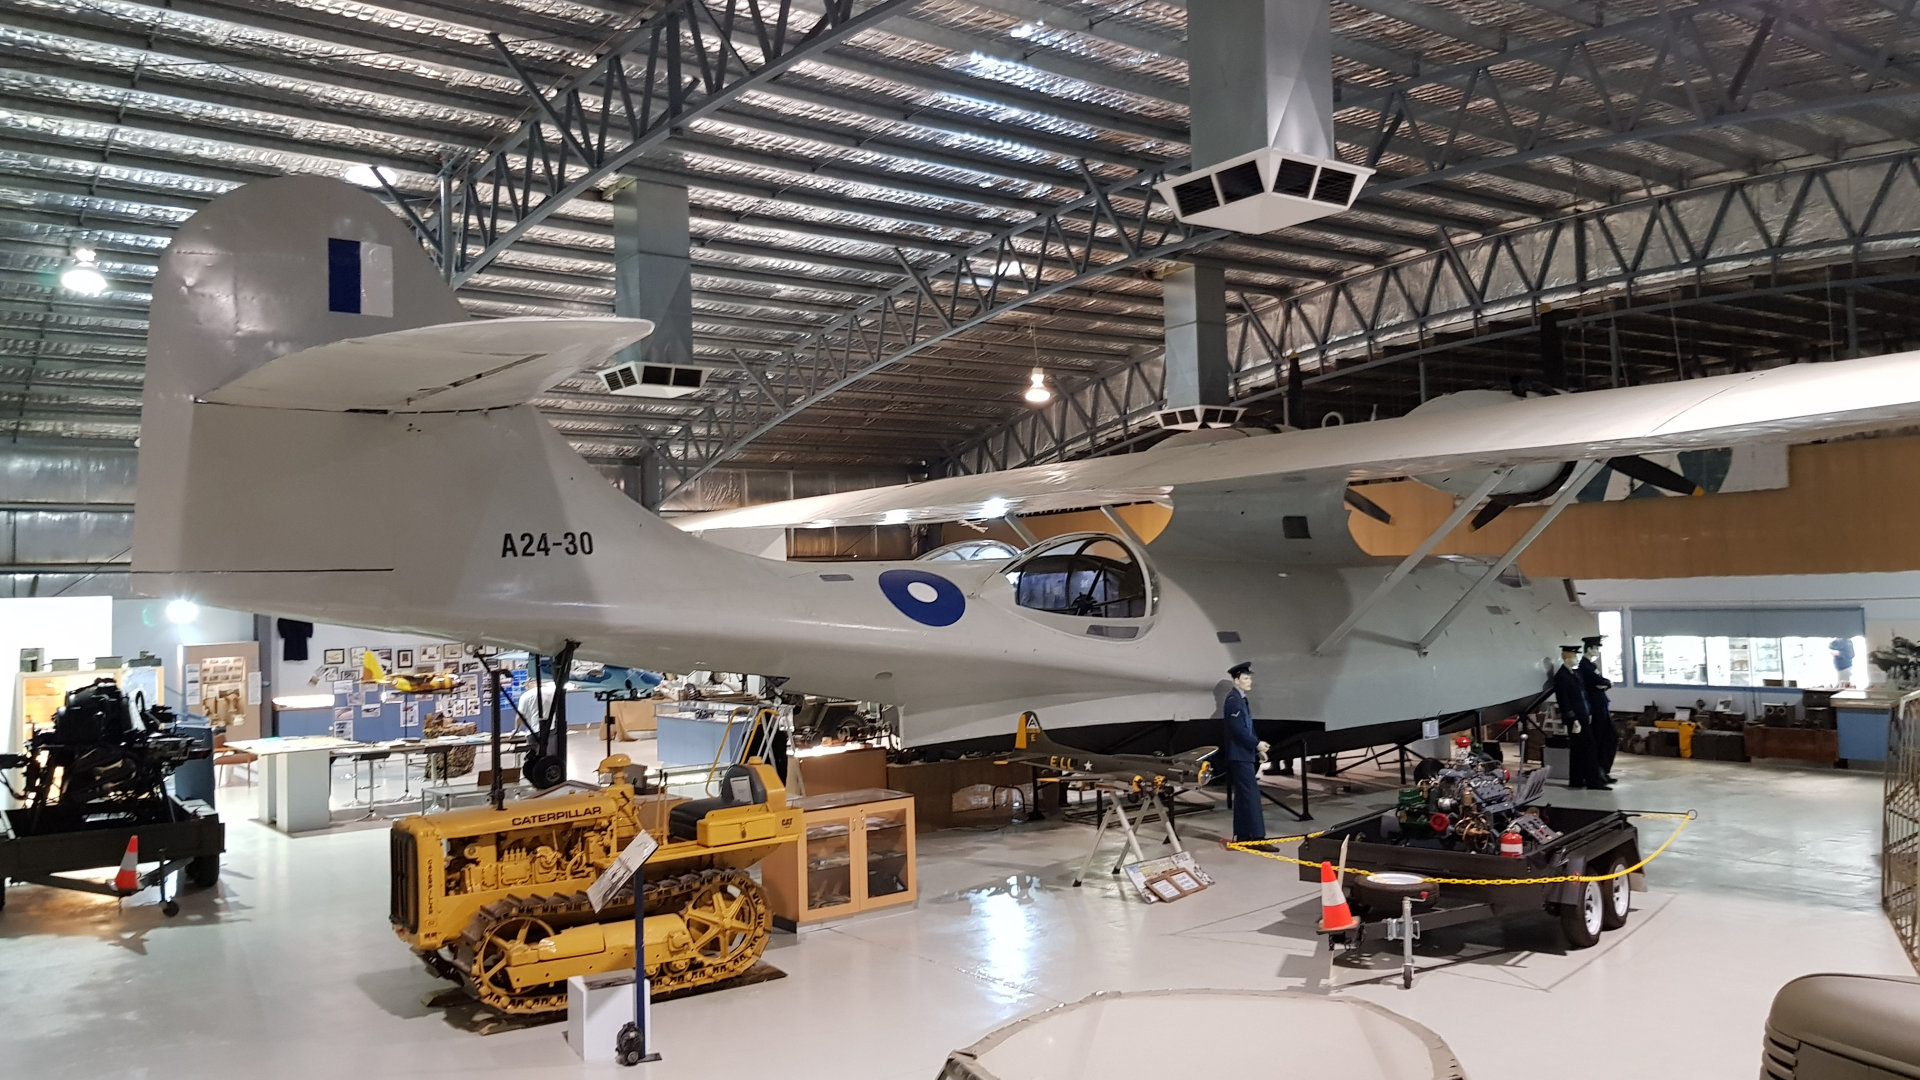 Catalina A24-30 flying boat in The Lake Boga Flying Boat Museum at Lake Boga south of Swan Hill, The Catalina is the star exhibit from World War Two. The original hidden communications bunker is onsite which the museum used to be contained in